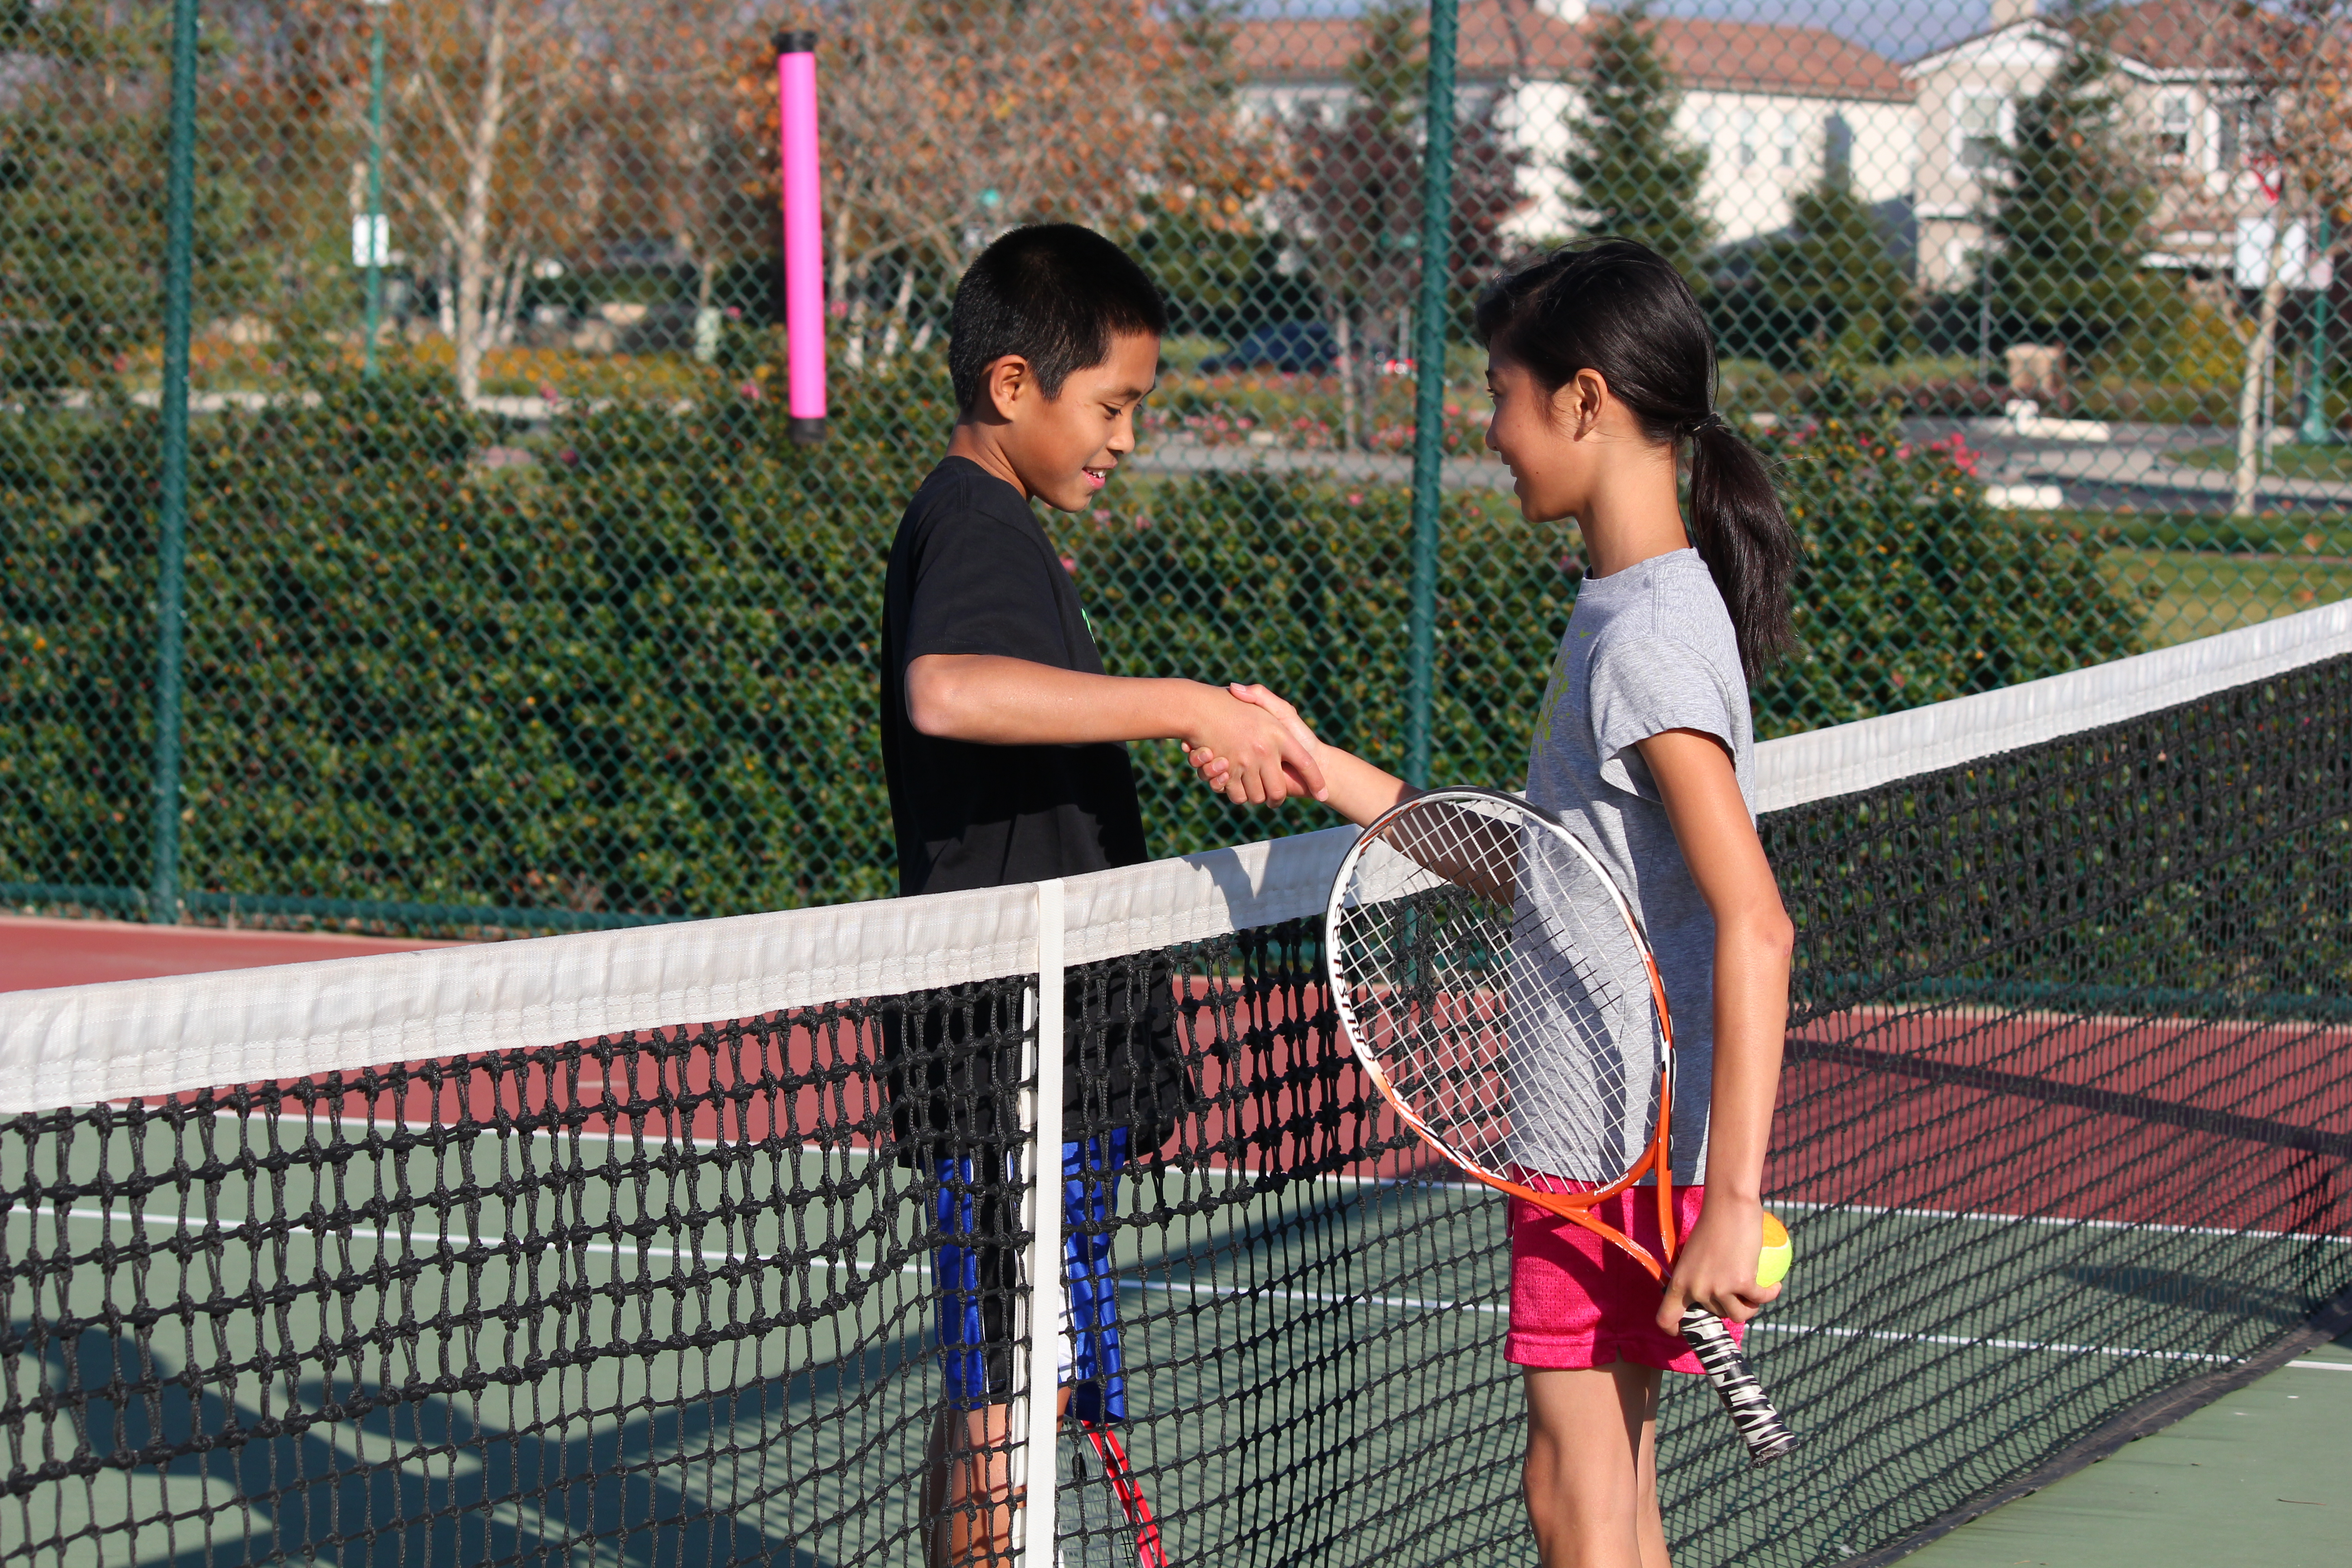 The Benefits of Doubles Tennis